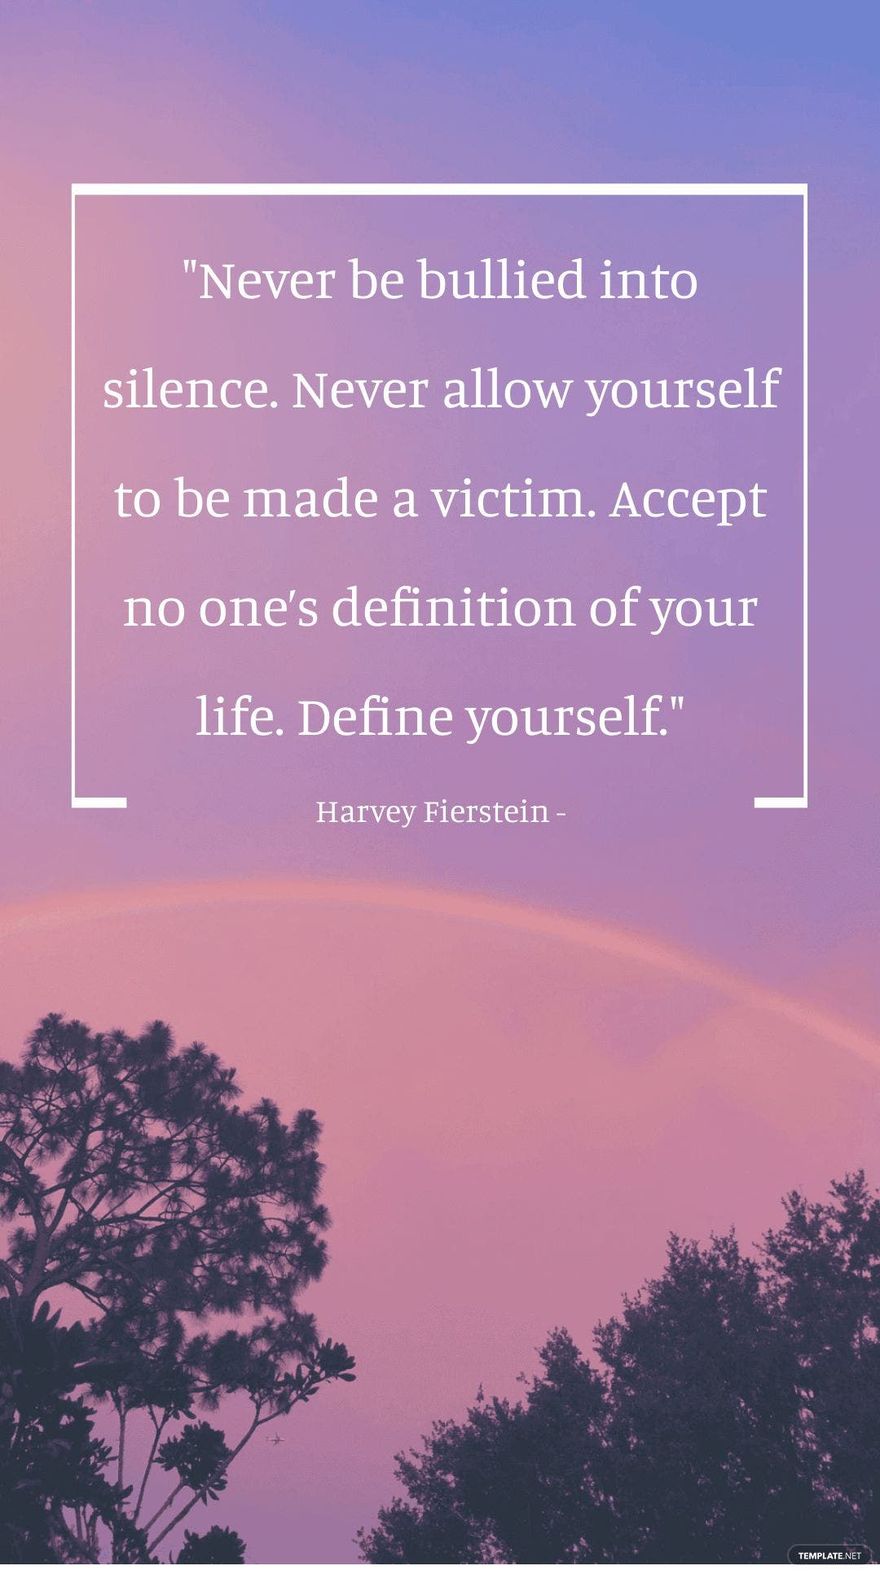 Harvey Fierstein - Never be bullied into silence. Never allow yourself to be made a victim. Accept no one’s definition of your life. Define yourself.